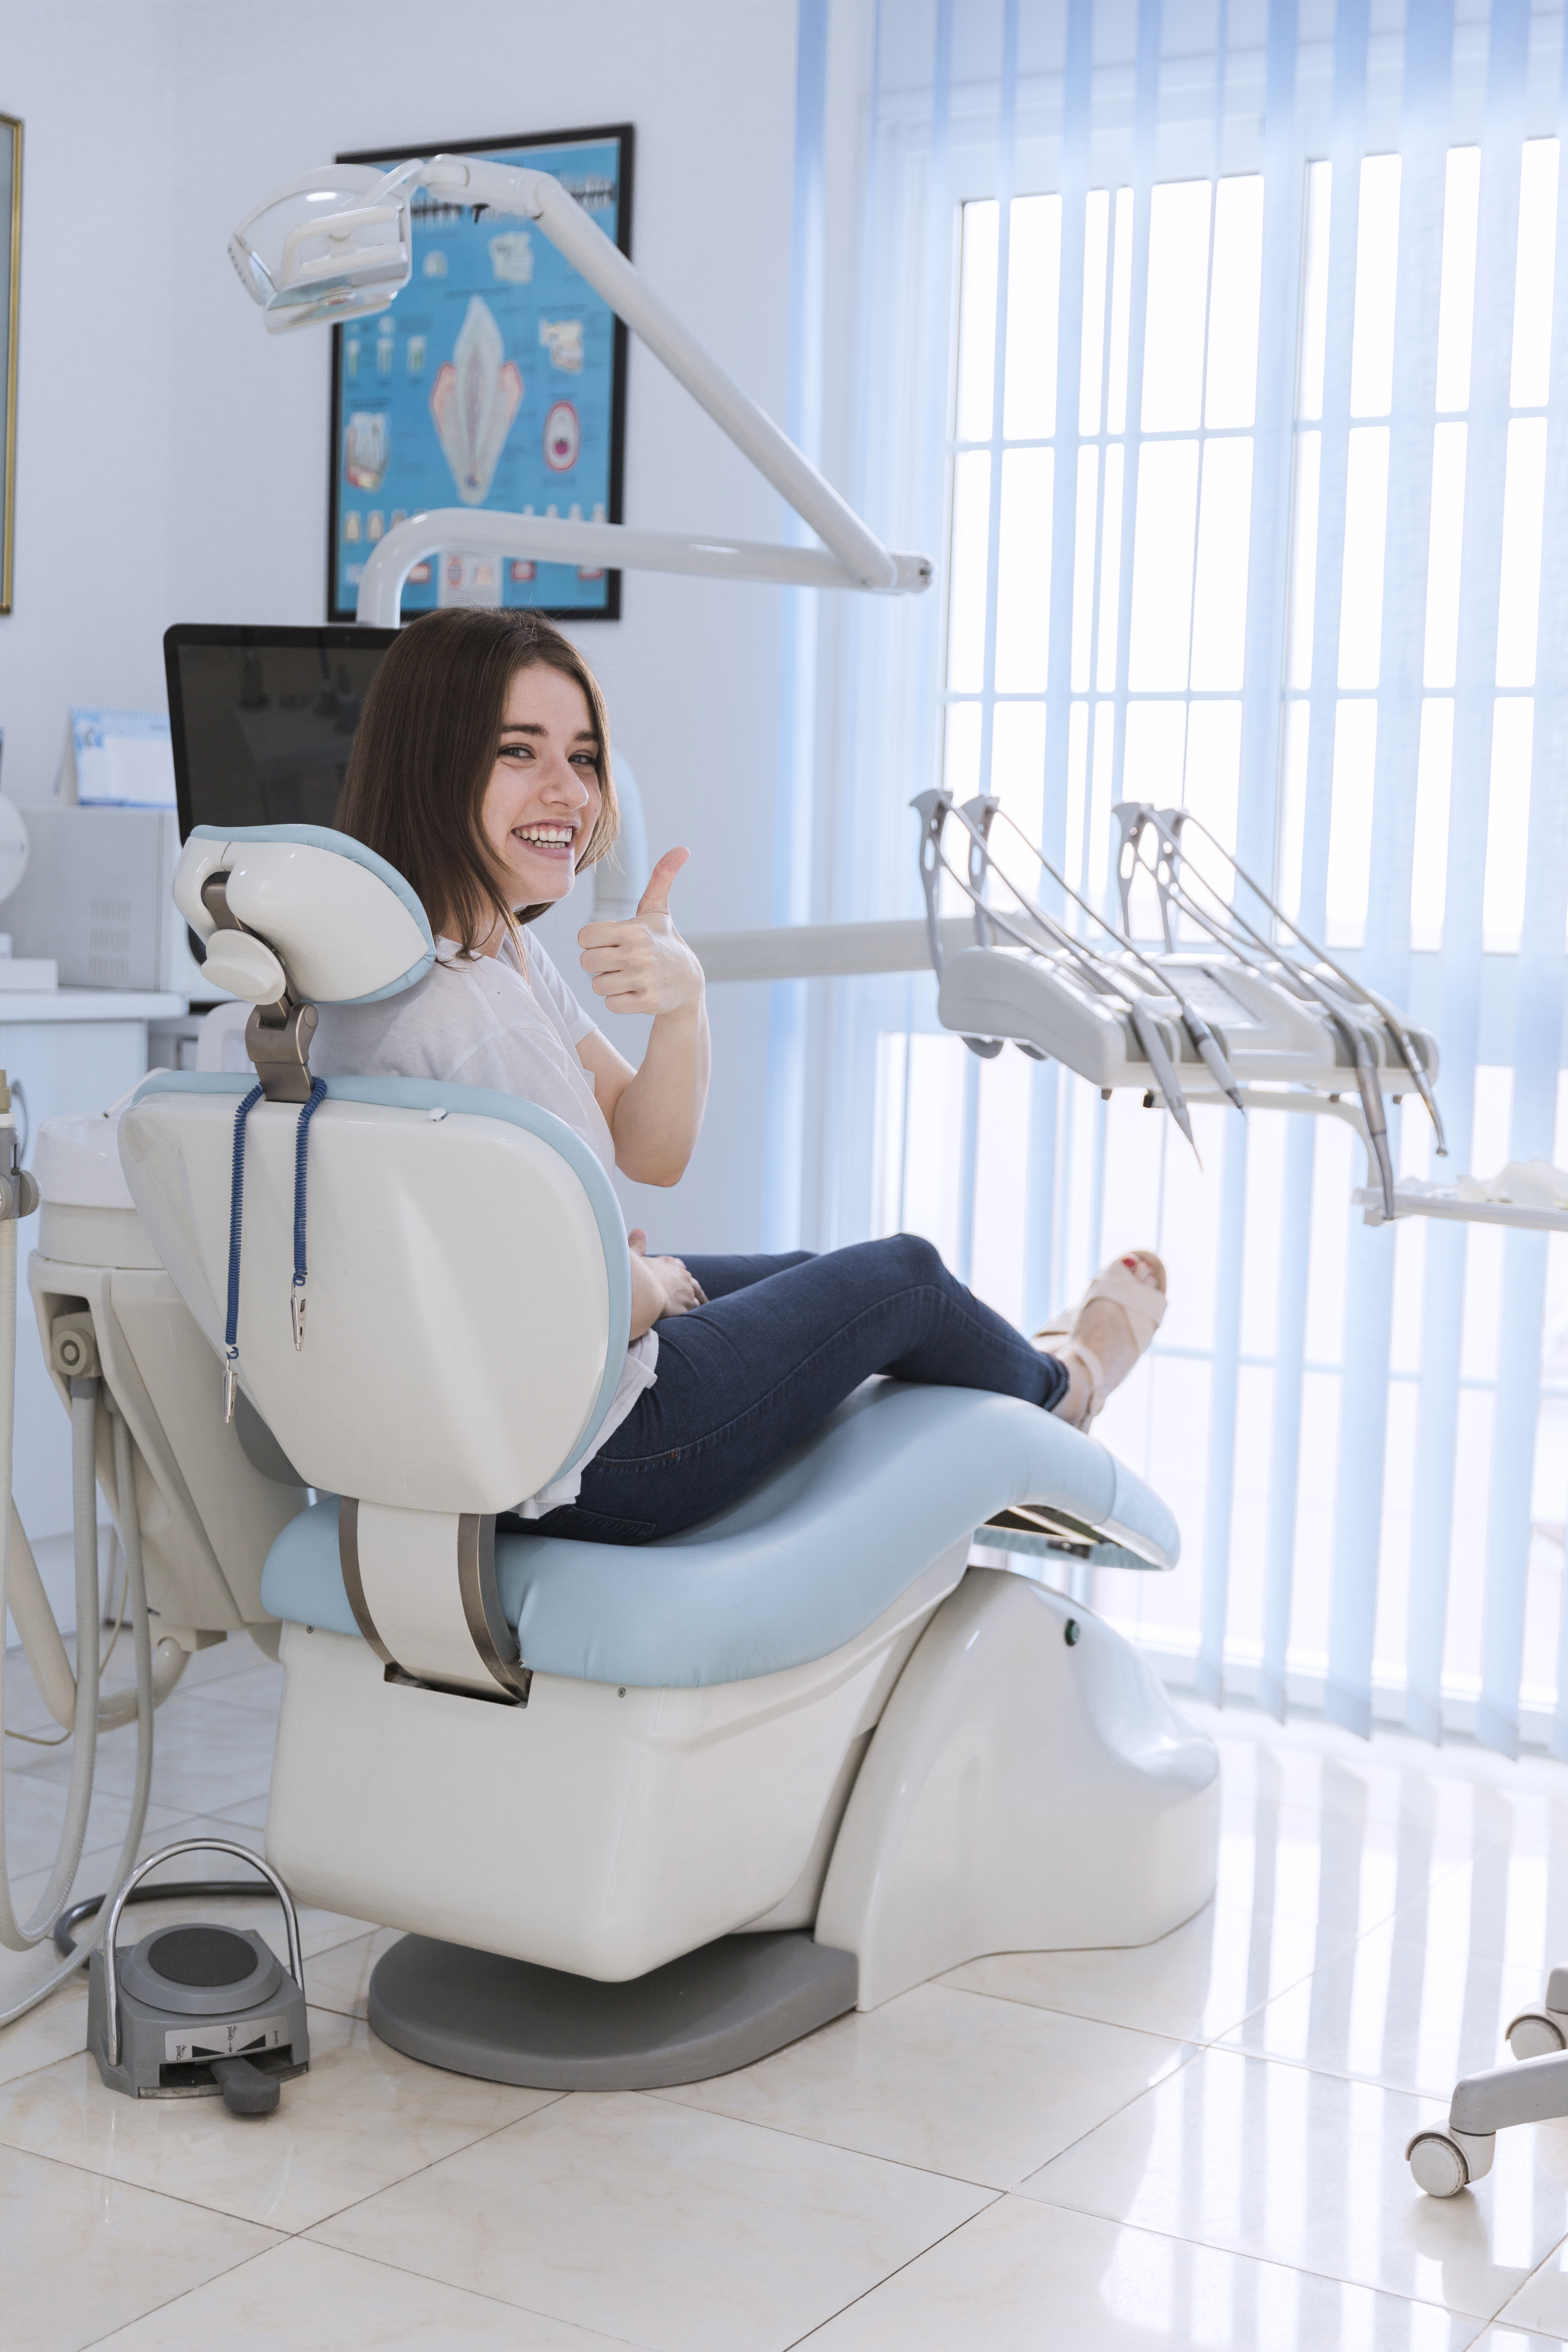 Experience the Future of Dentistry Today at Dove Dental Spa in Earlsfield